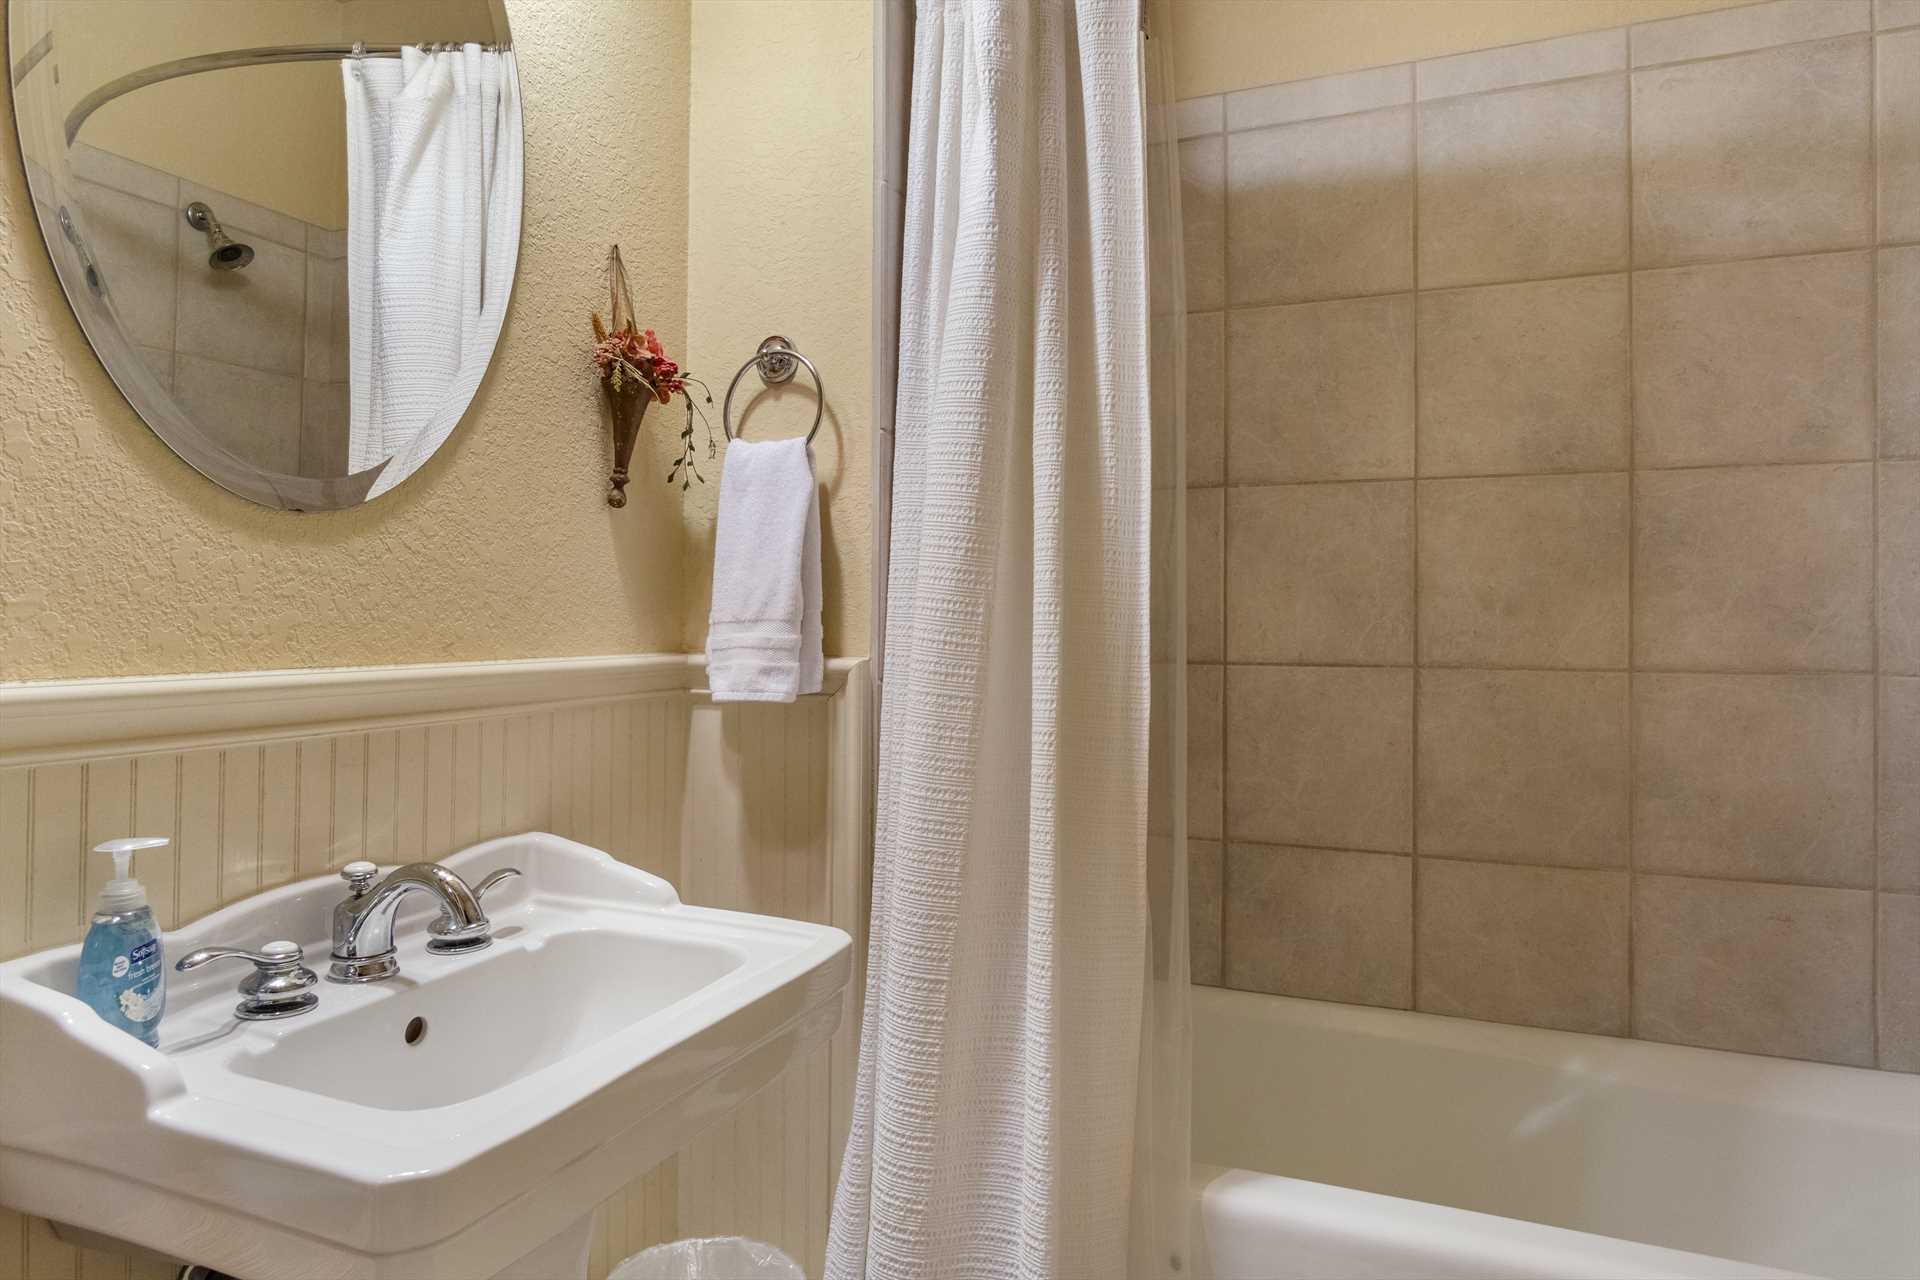                                                 The second full bath at the Retreat features a spotless shower and tub combo.